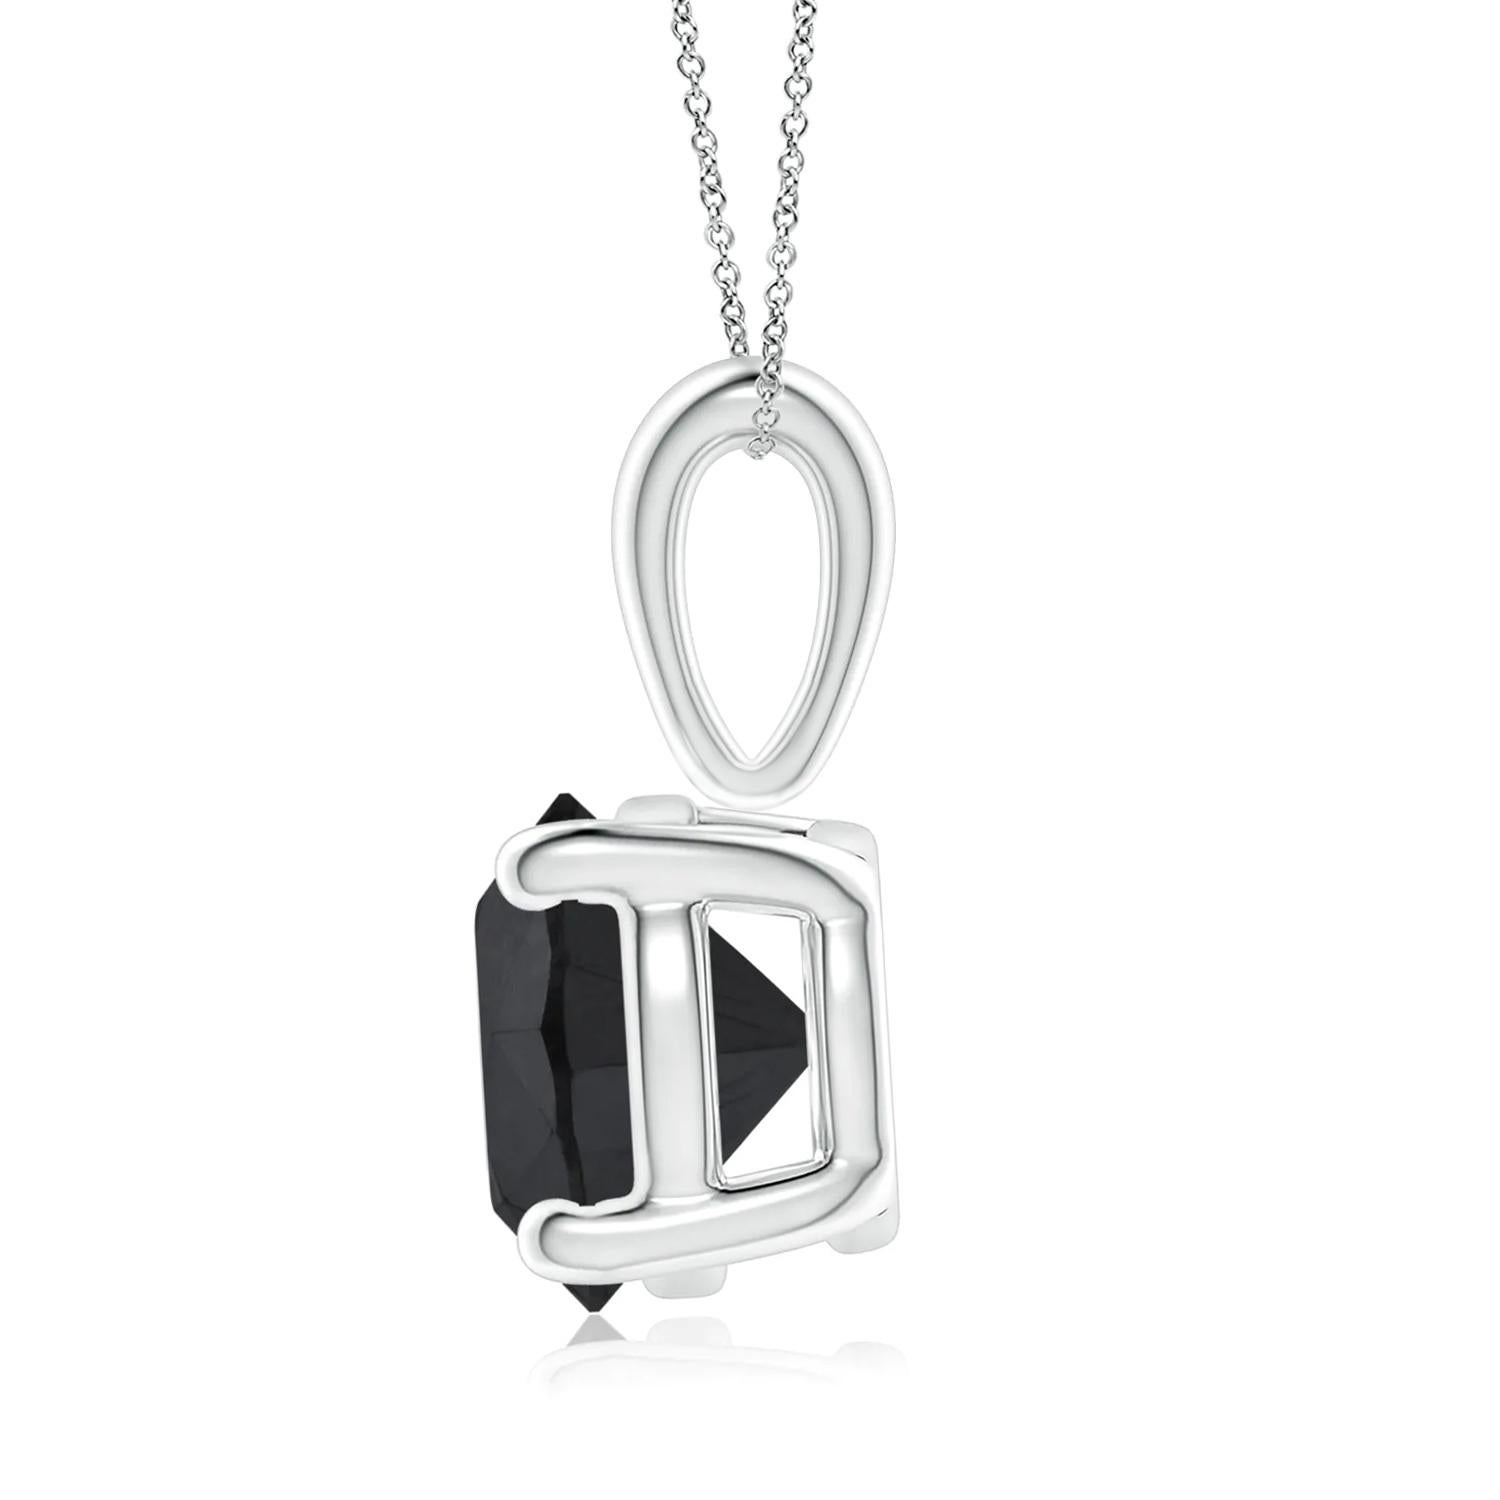 Surprise a special woman in your life with this breathtaking, statement hand crafted solitaire black diamond necklace. This eye-catching pendant necklace features a 2.28 carat round cut black diamond, measuring 7.90 x 7.95 x 5.54 mm set in 14k white